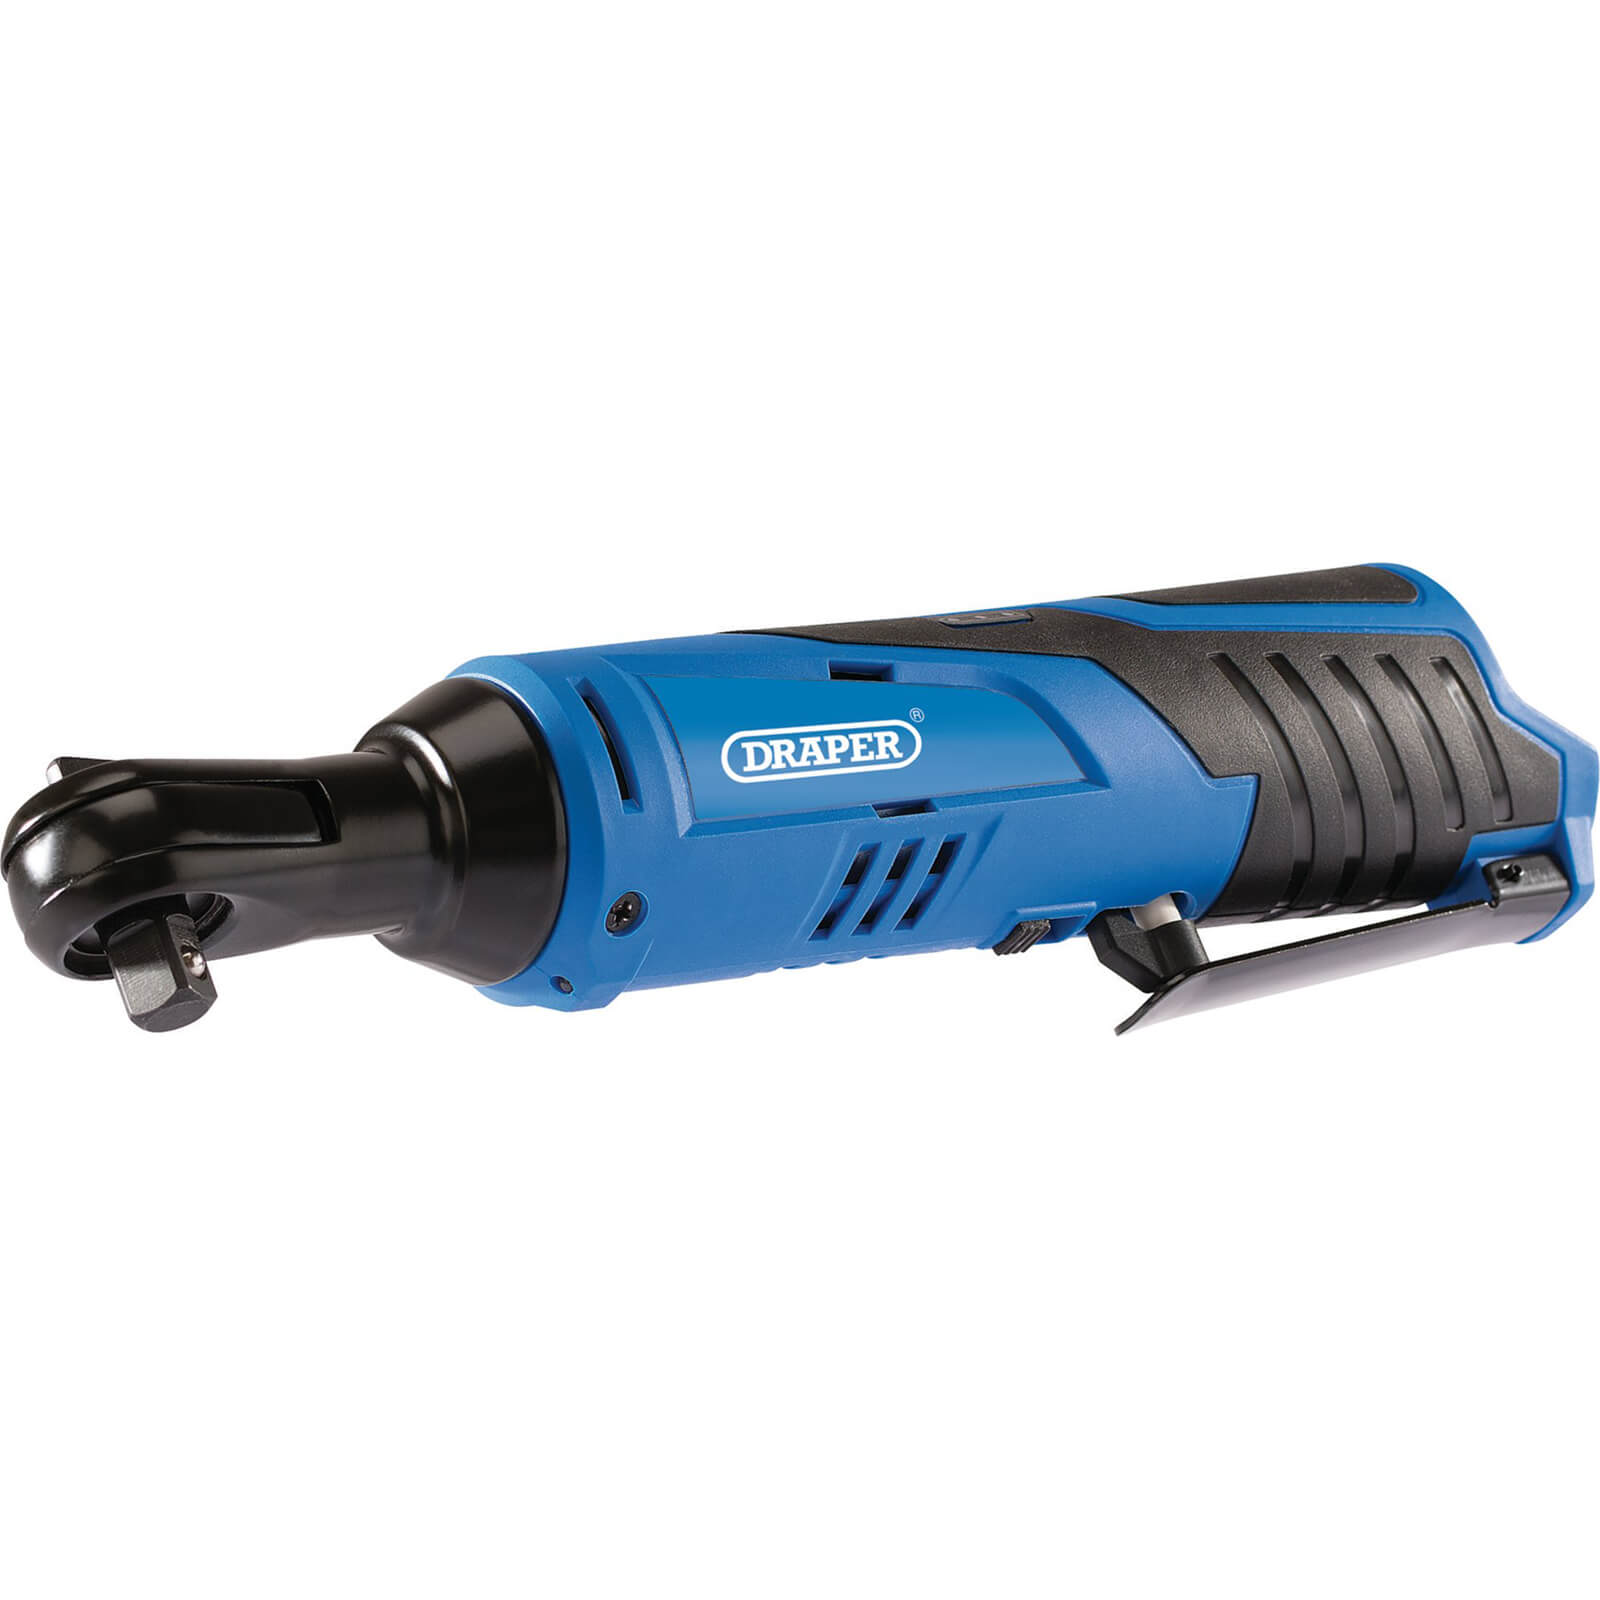 Image of Draper RW12VD 12v Cordless 3/8" Drive Ratchet Wrench No Batteries No Charger No Case